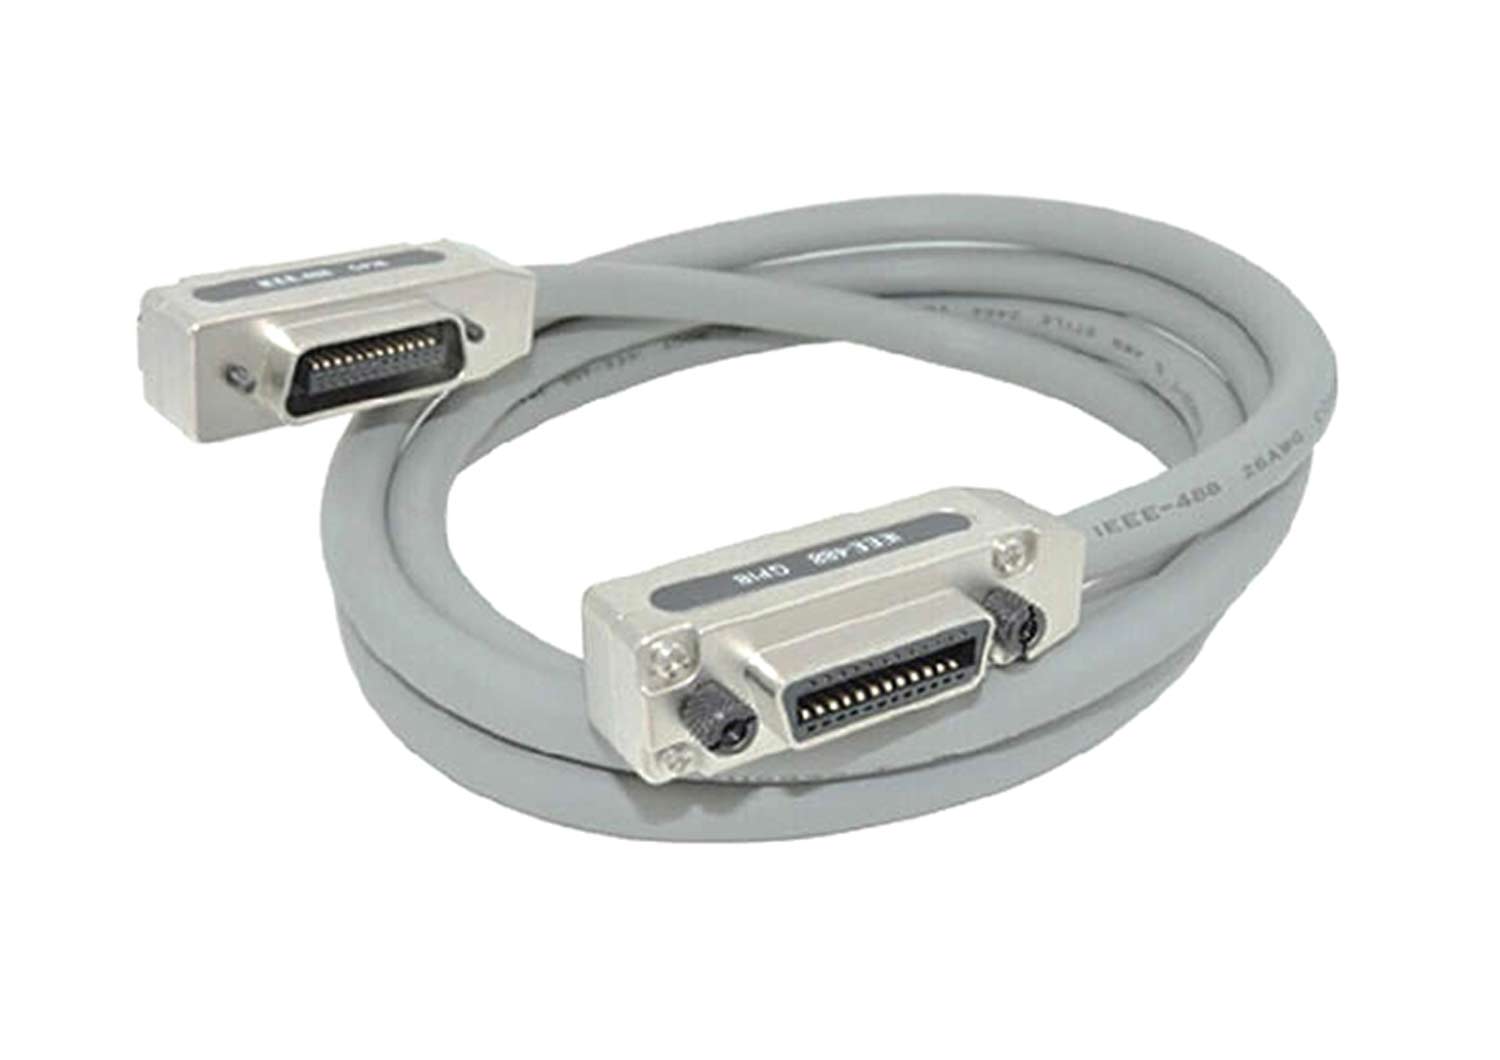 Meatest GPIB cable